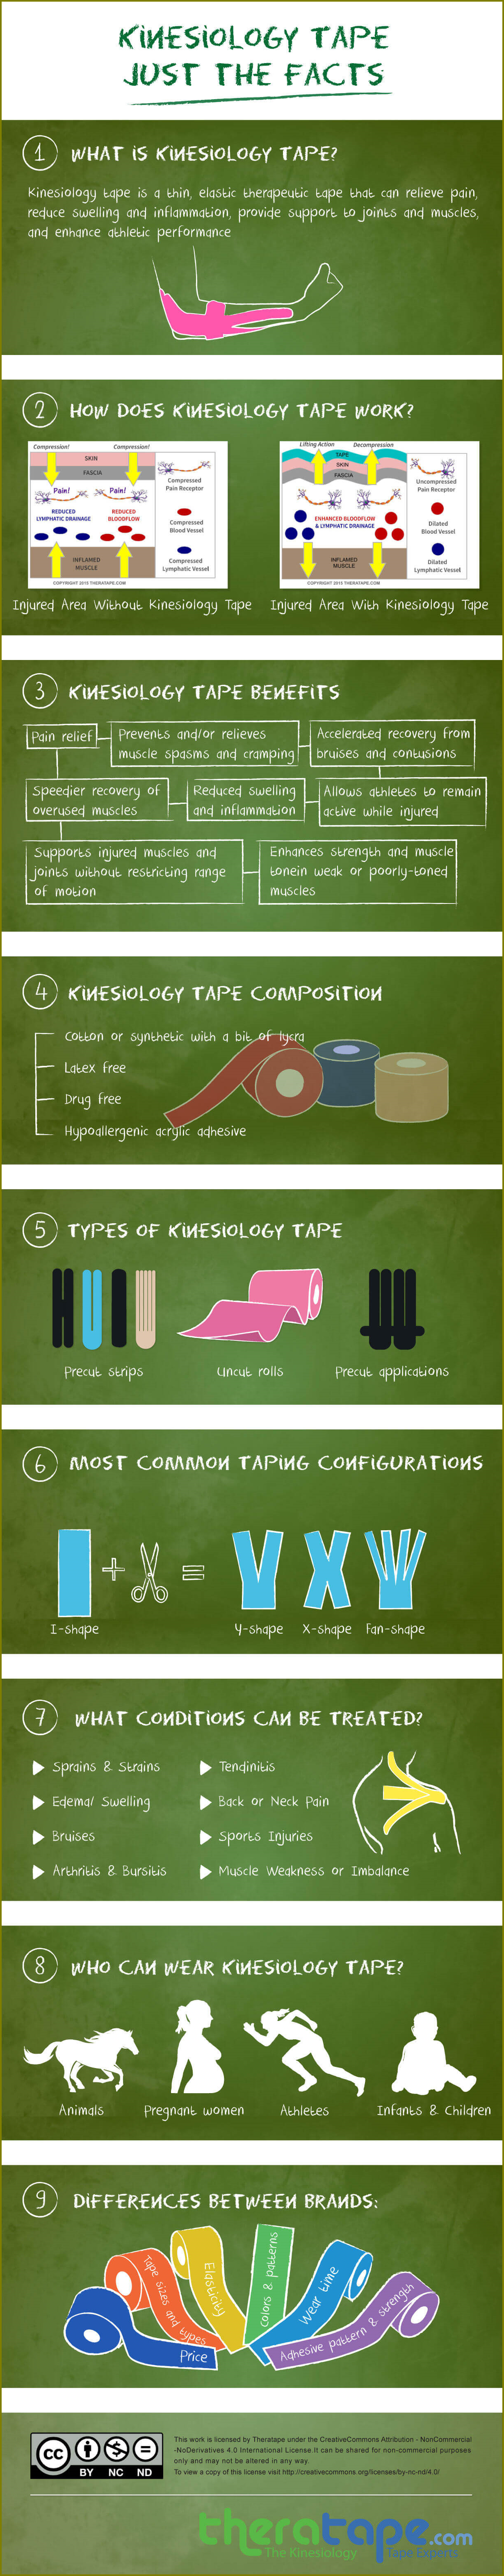 Kinesiology Tape - The Facts